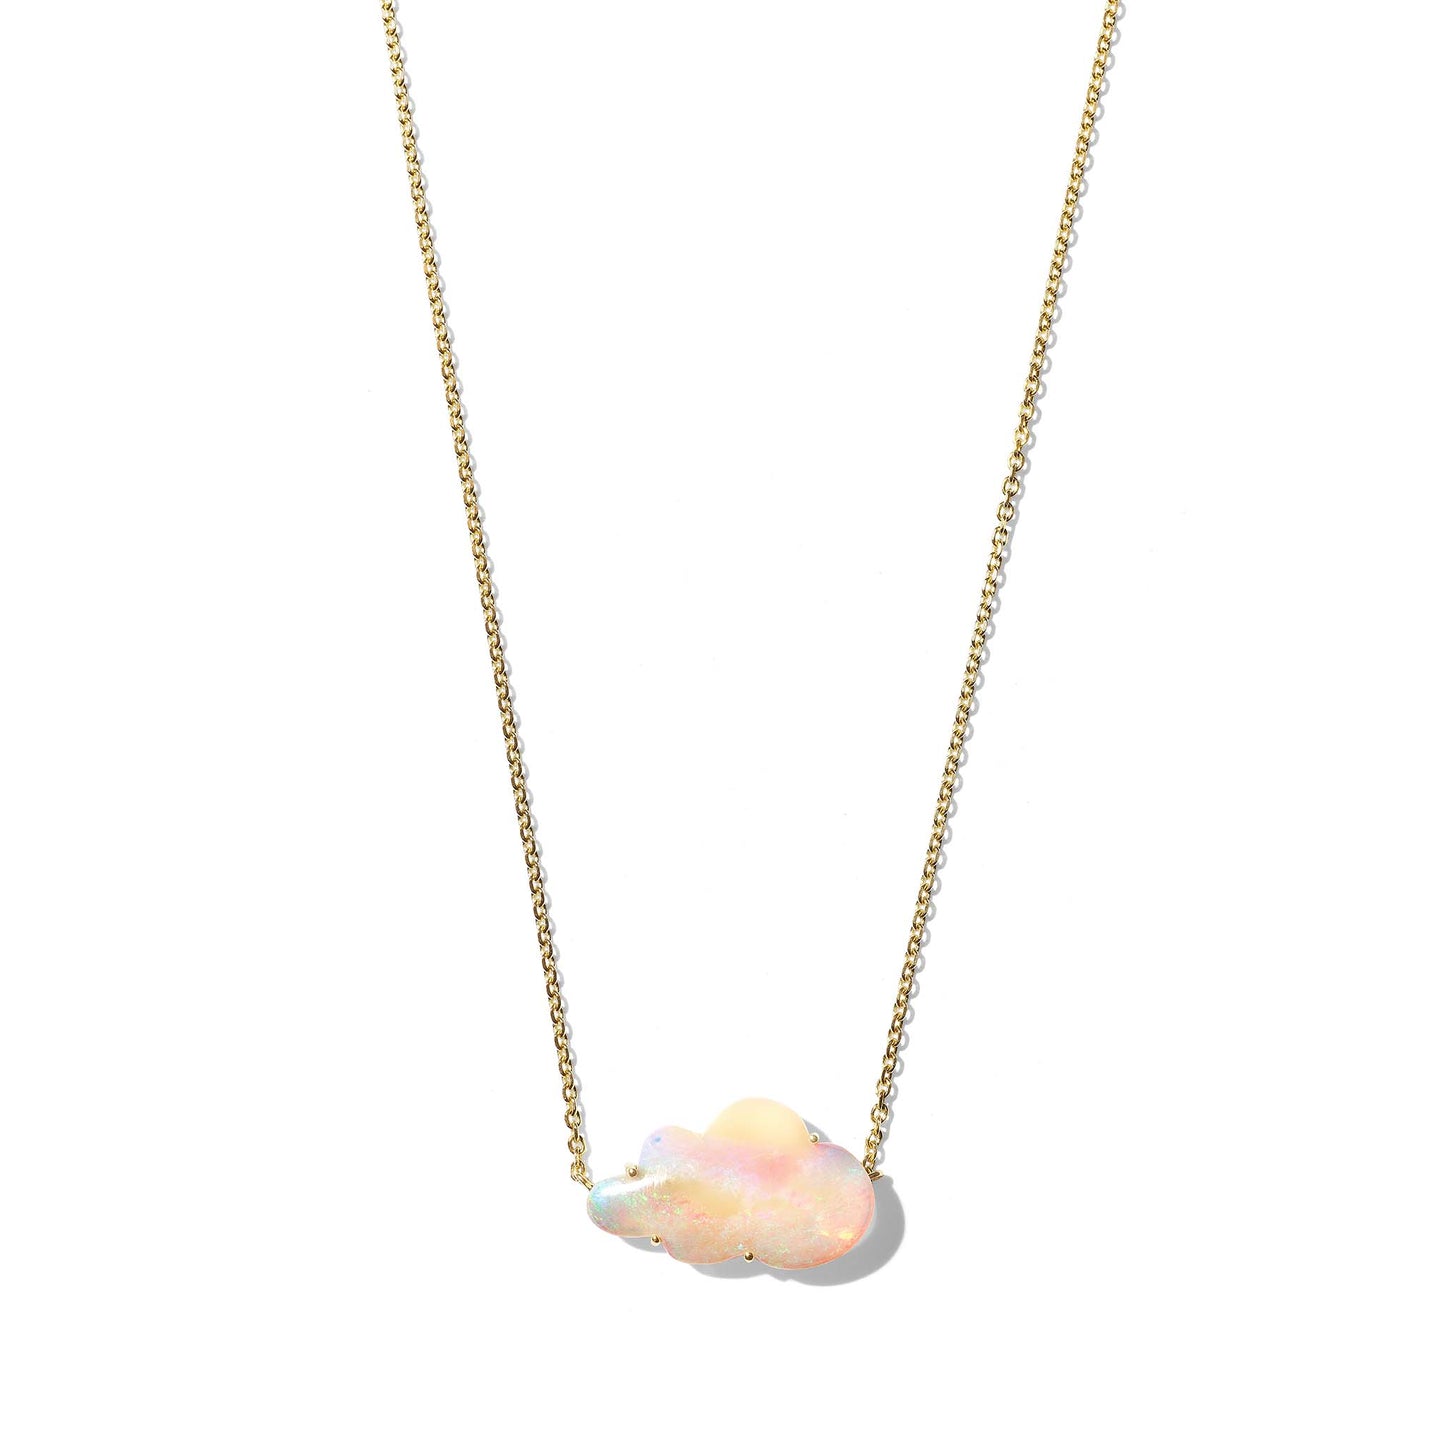 Mimi So Cloud Opal Necklace - Large_18k Yellow Gold